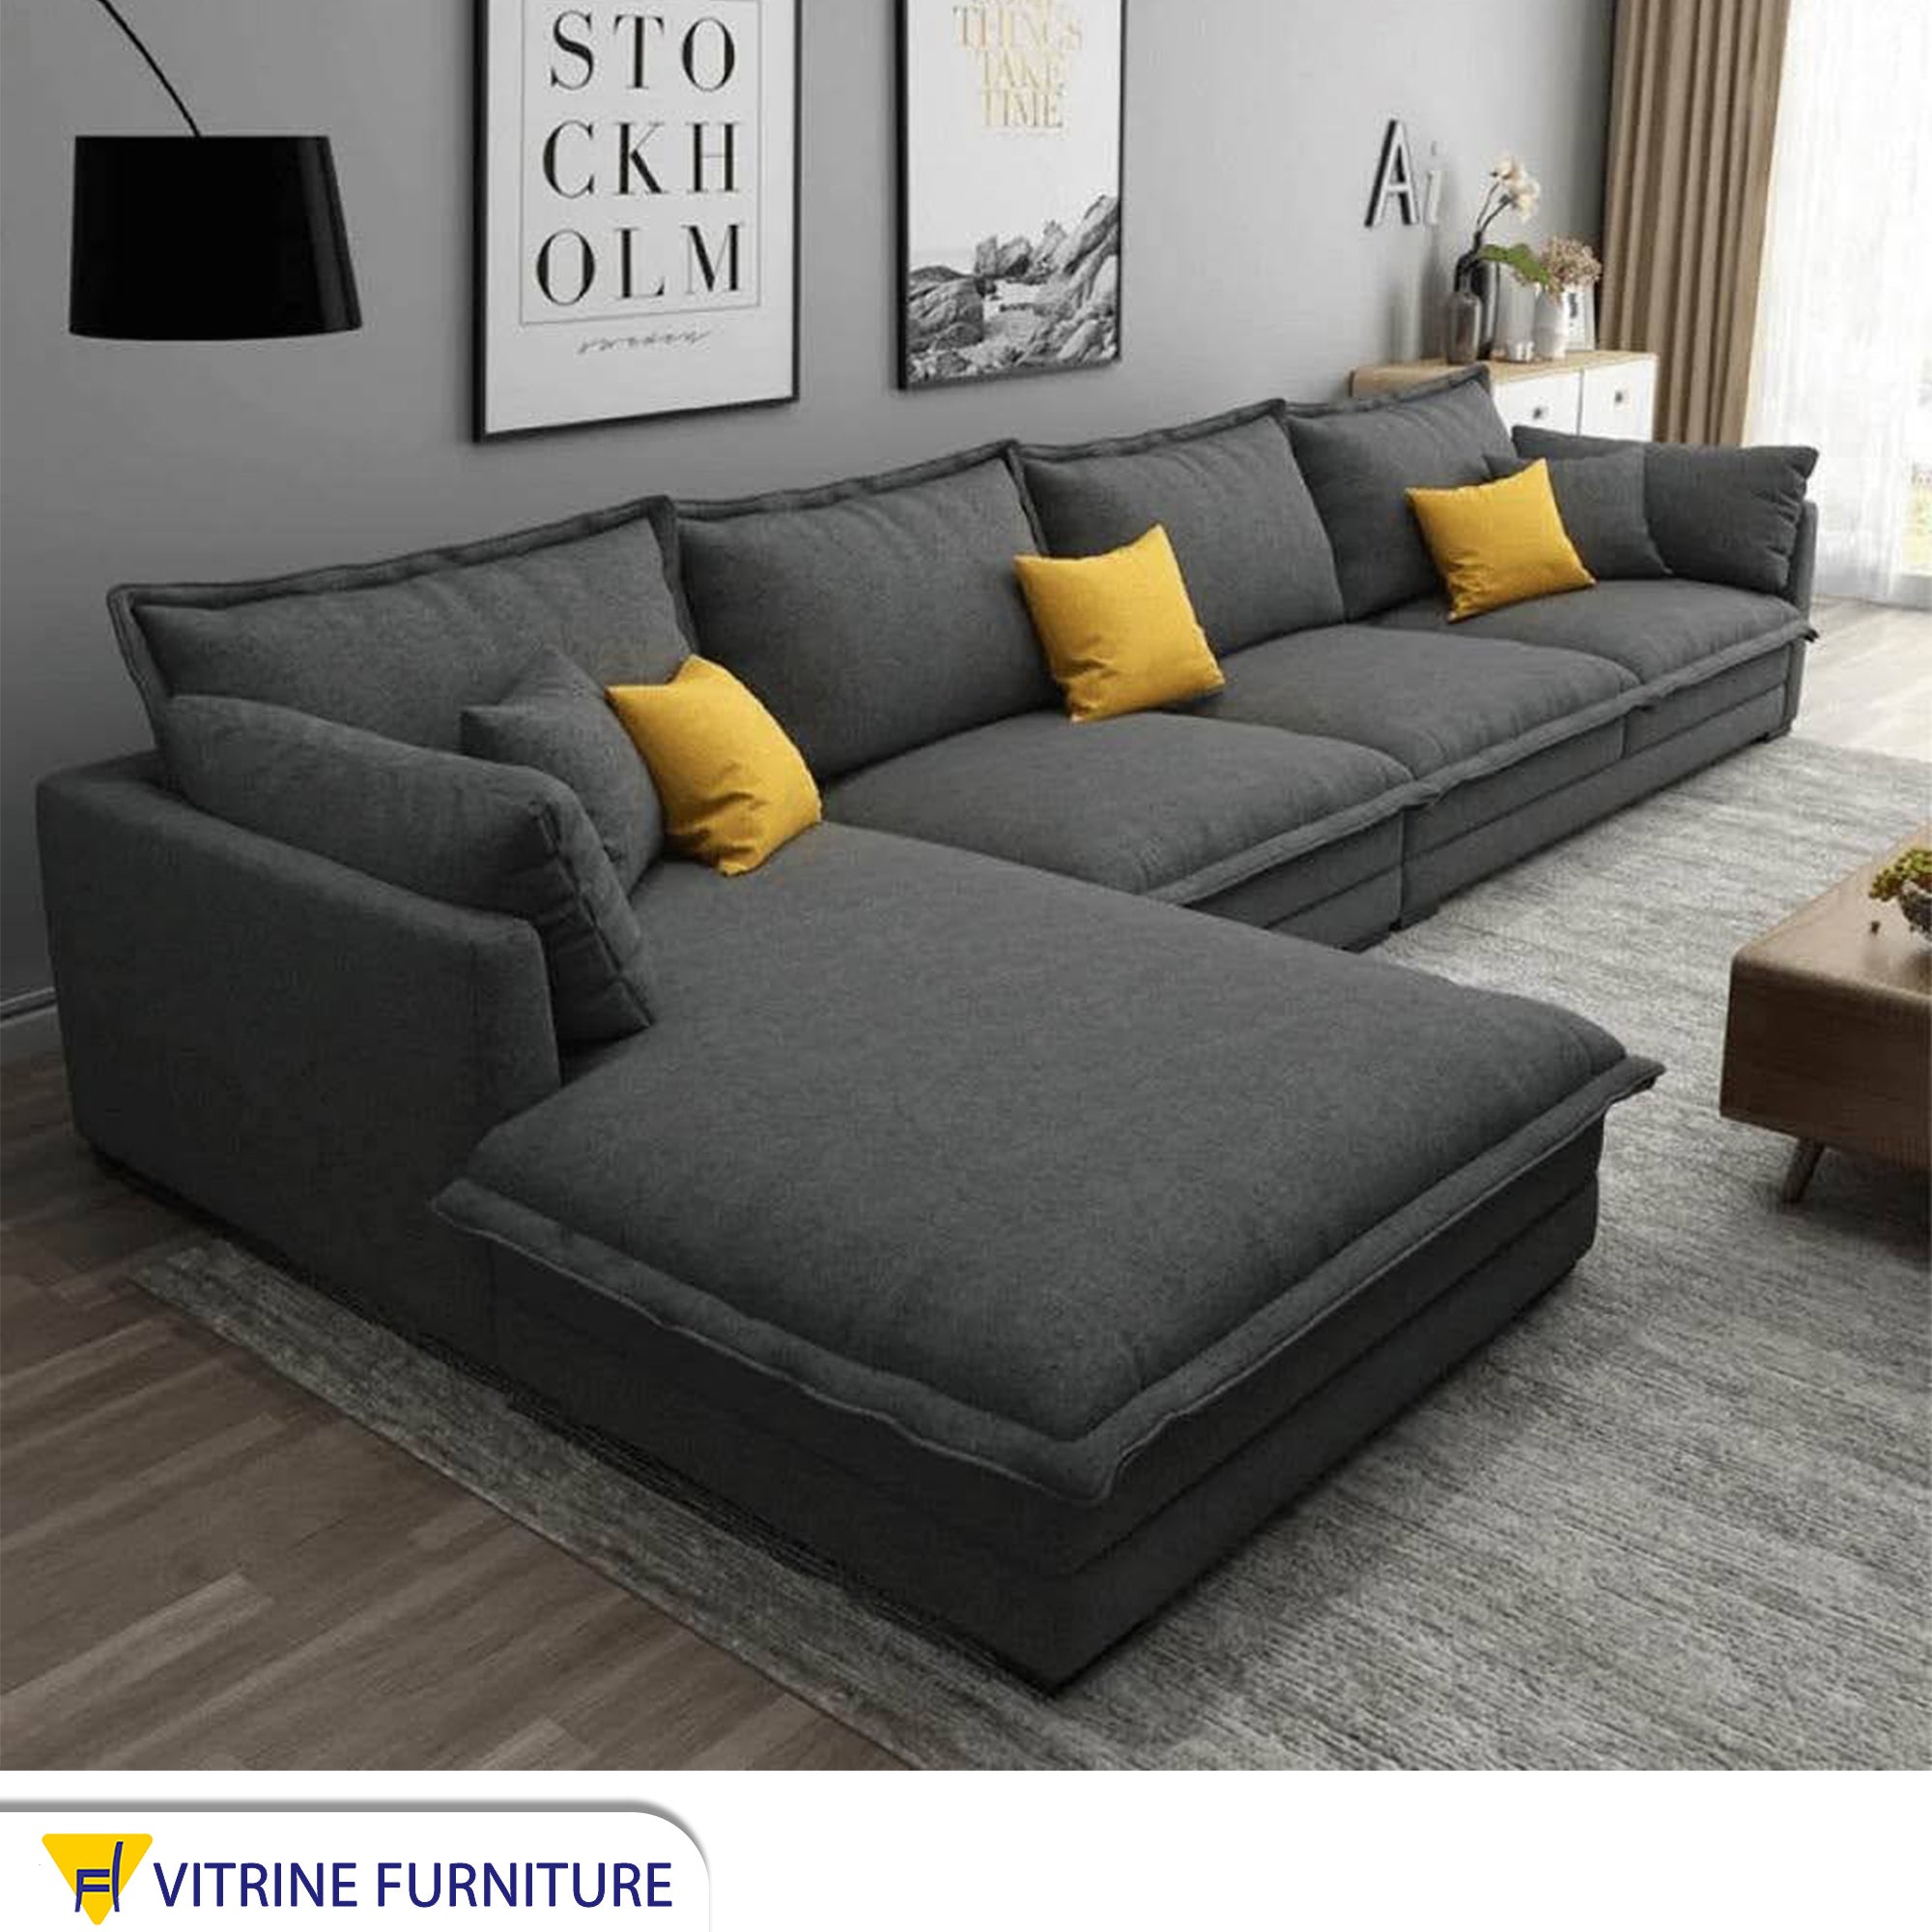 Its corner for the living room is a gray letter L